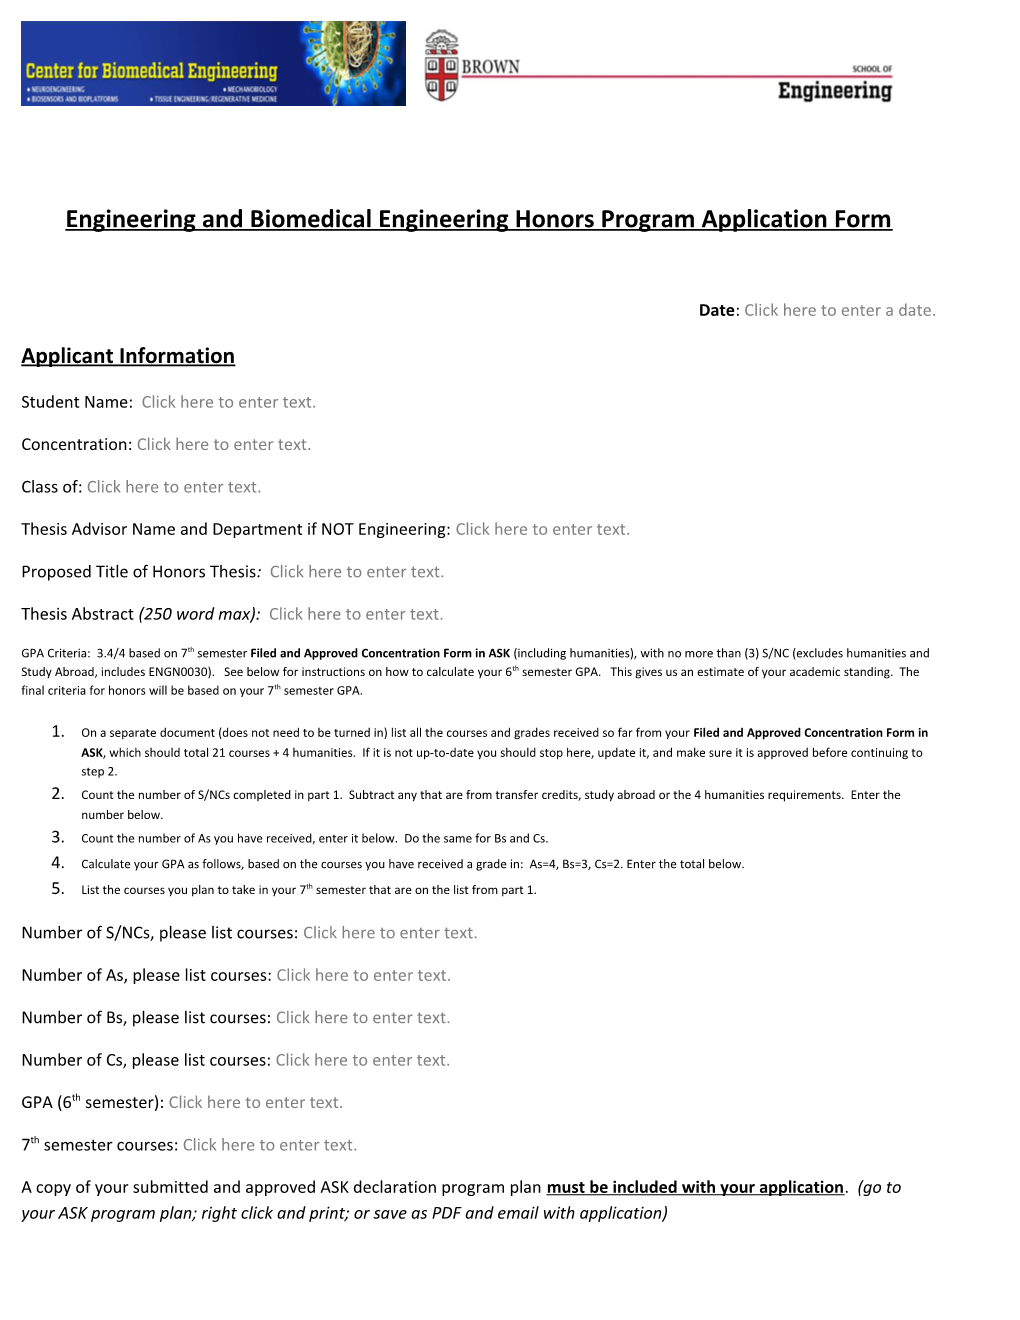 Engineering and Biomedical Engineering Honors Program Application Form